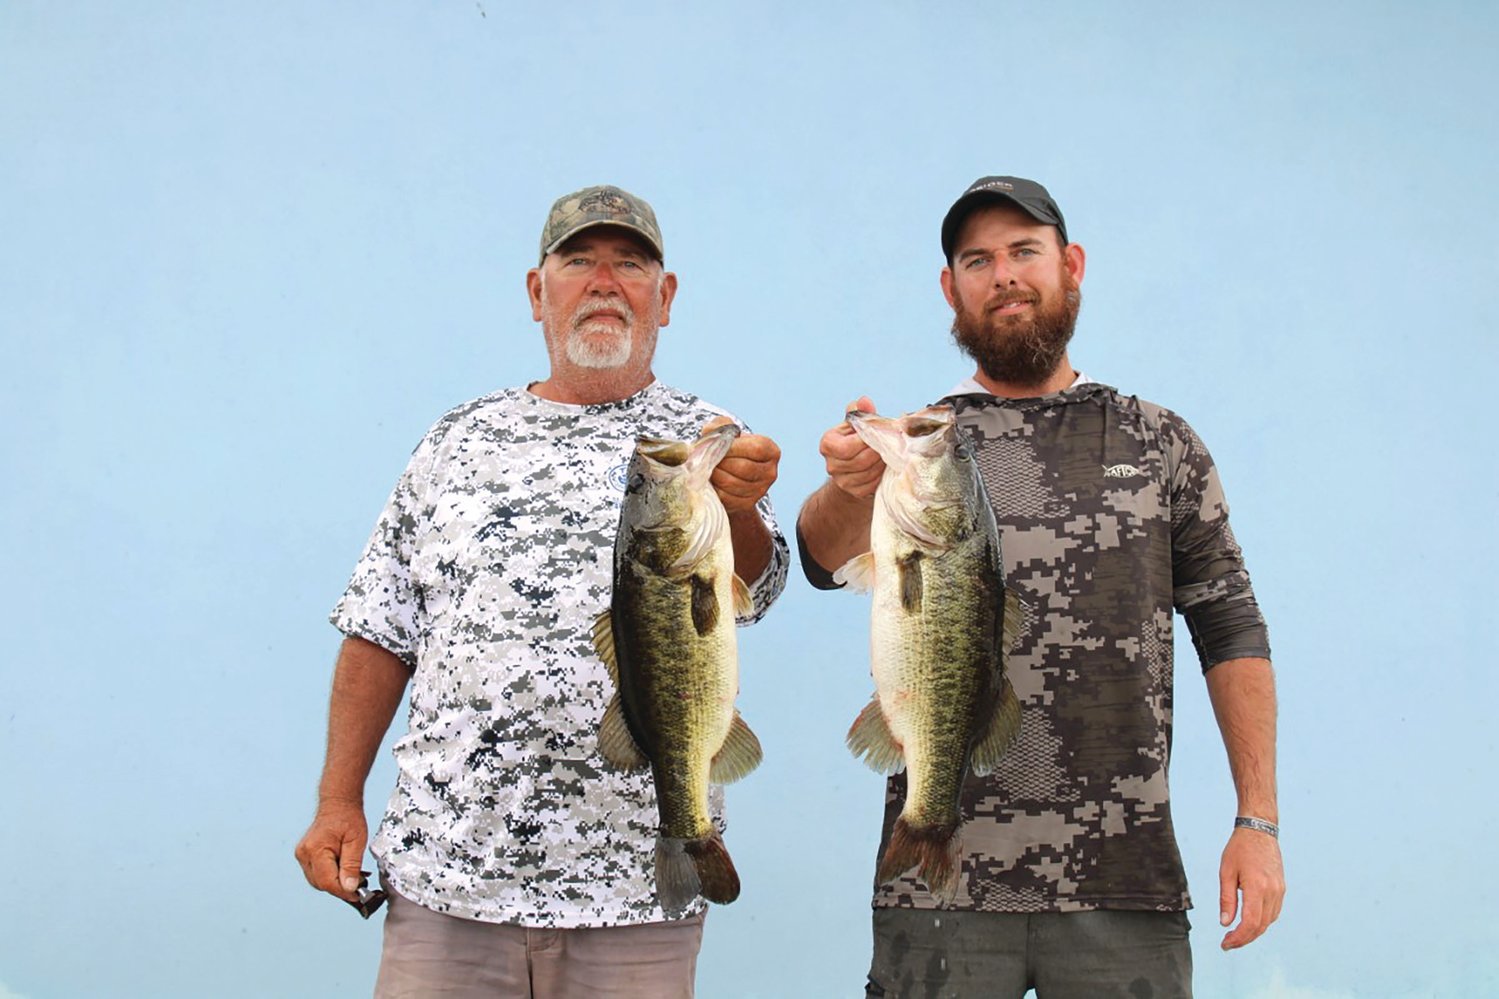 Second place with a total weight of 16.75 pounds went to Kyle and Larry Powers.